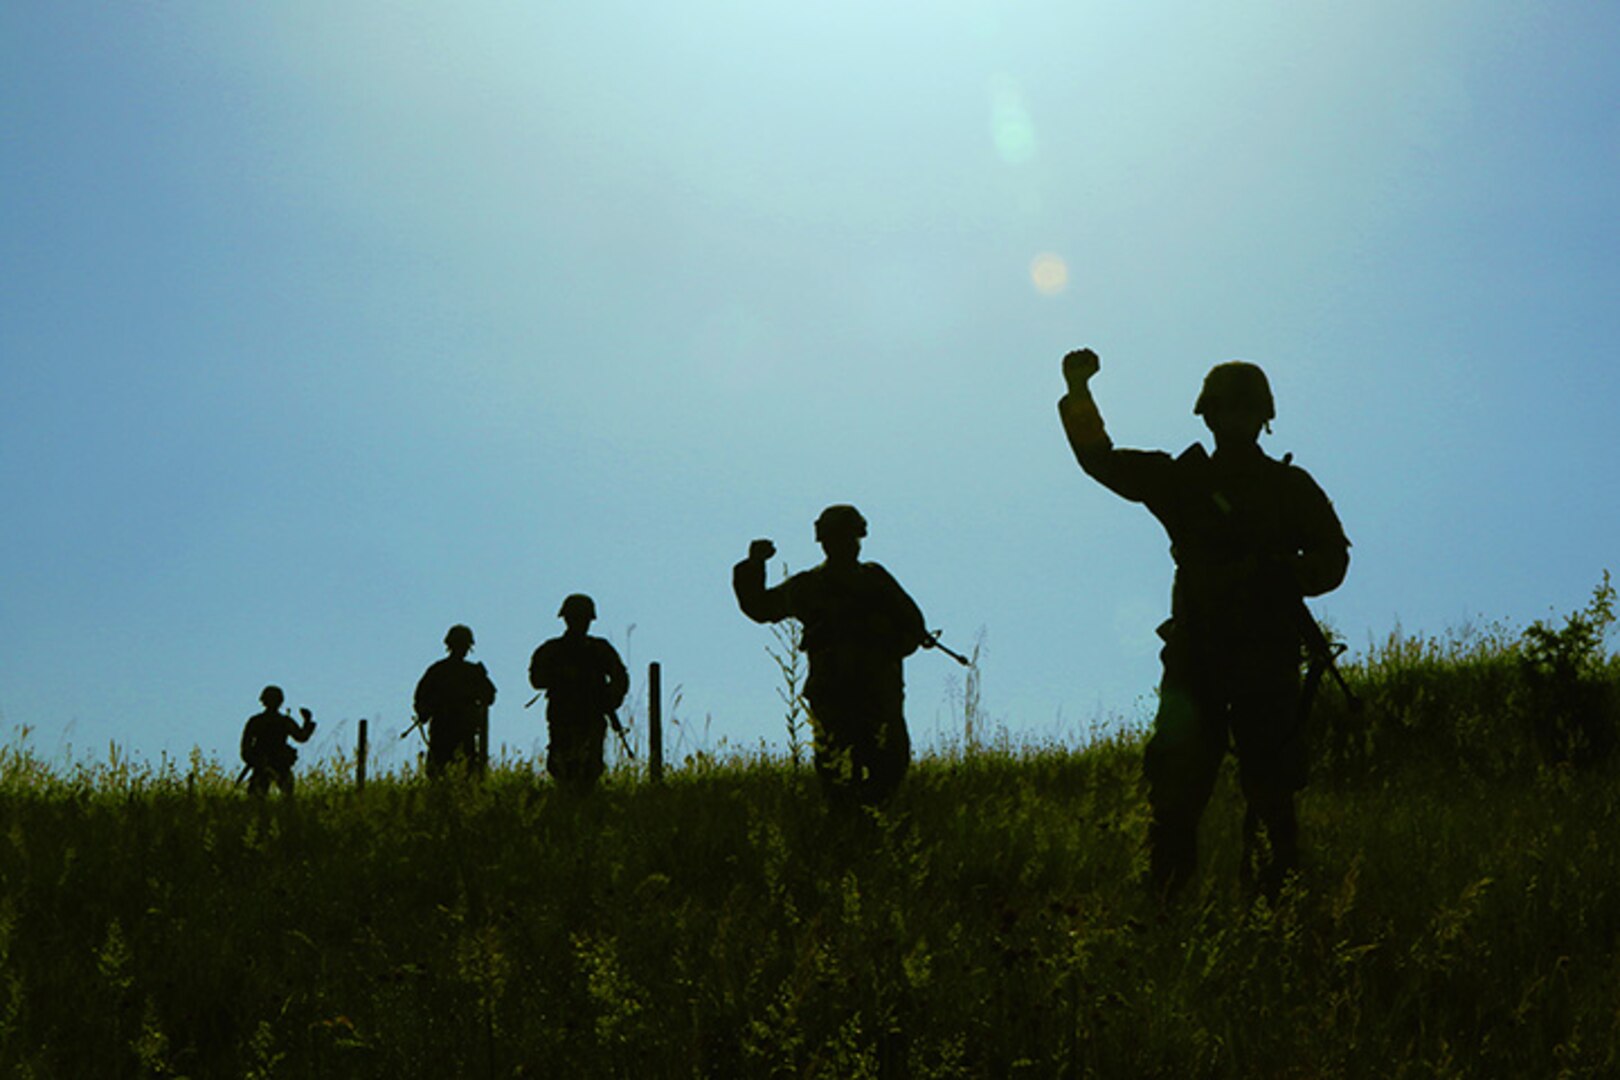 Members of the 838th Military Police Company out of Youngstown, Ohio, conduct a cordon and search exercise in the lush green Preševo Valley June 13, 2019, as part of Platinum Wolf 2019 in South Base, Serbia. Platinum Wolf is a multinational peacekeeping exercise designed to enhance interoperability and cooperation between partner and allied nations while building relationships. As part of Department of Defense’s State Partnership Program, the Ohio National Guard has had a state partnership with Serbia since 2006.